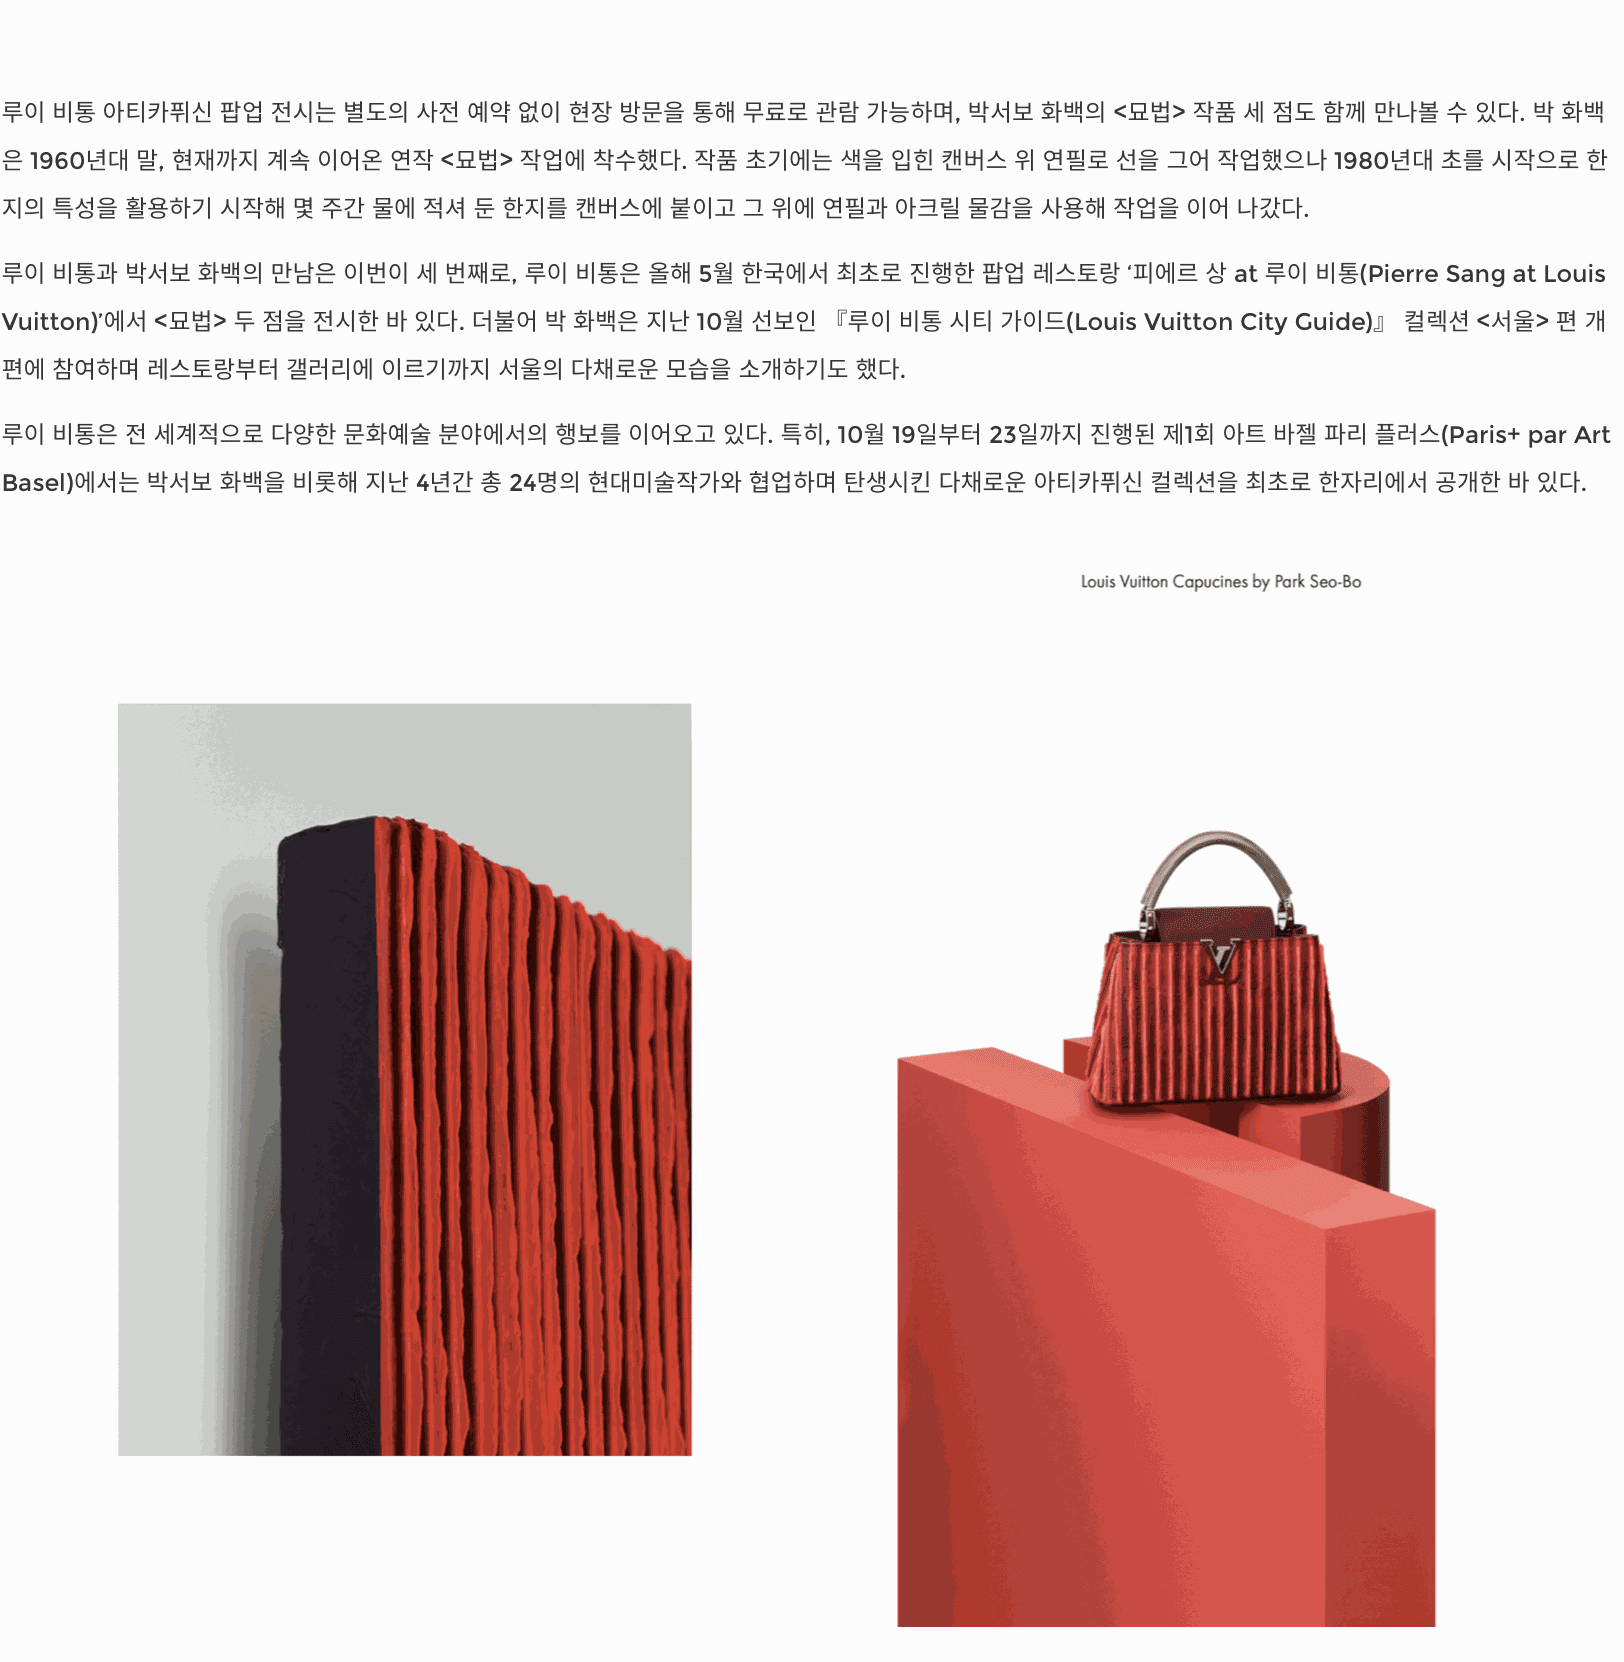 Park Seo-bo first Korean artist to collaborate with Louis Vuitton